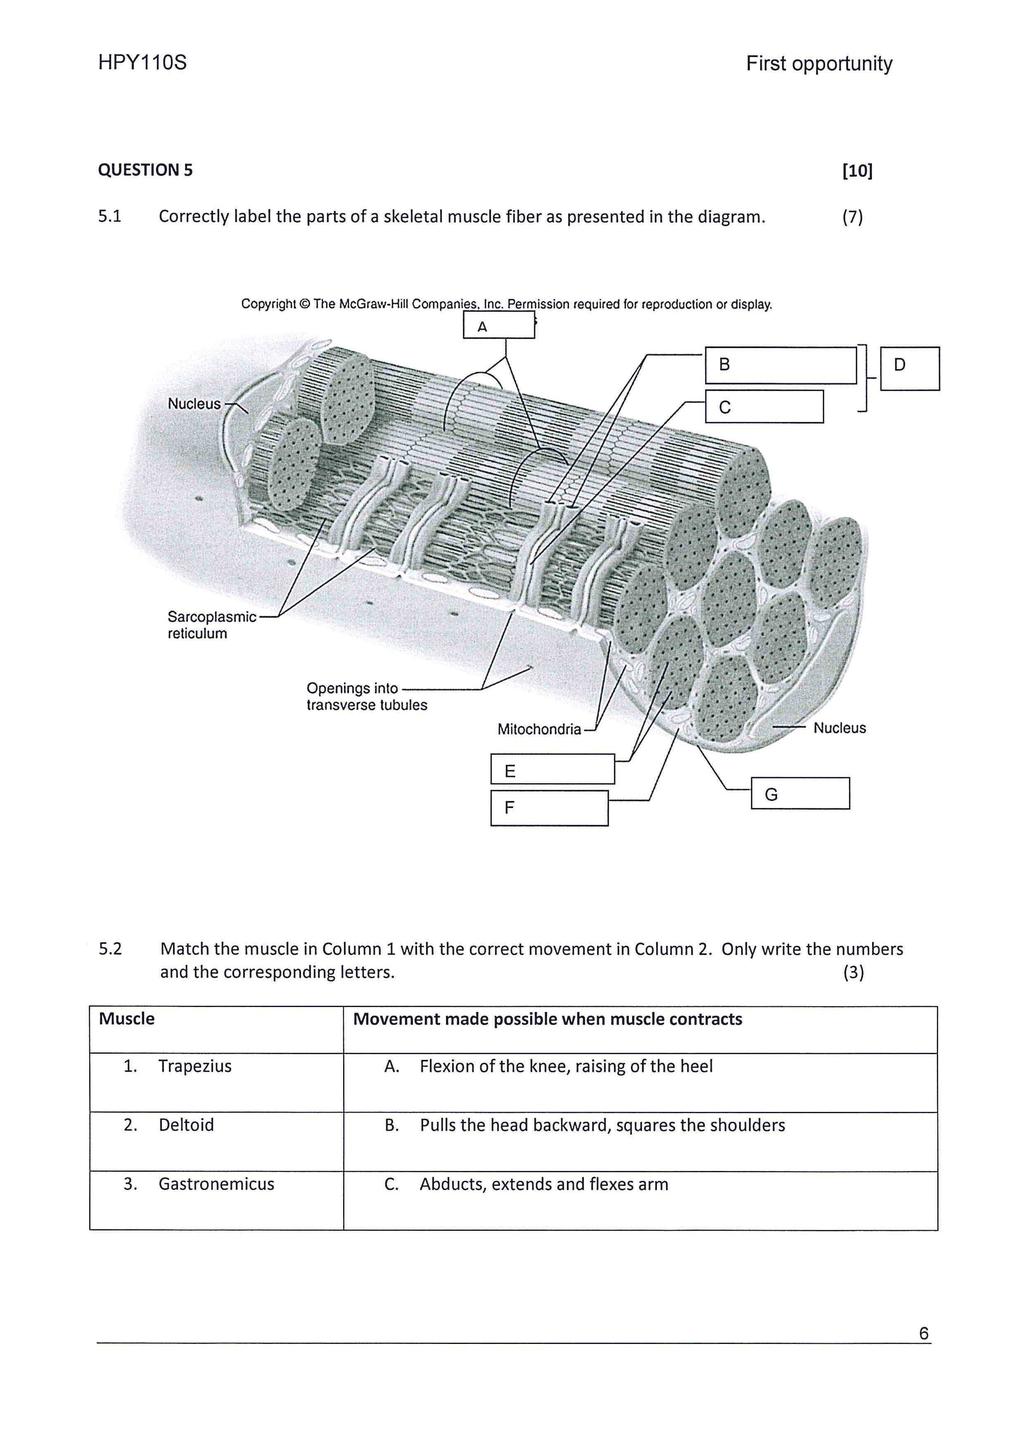 @ QUESTION 5 [10] 5.1 Correctly label the parts of a skeletal muscle fiber as presented in the diagram.